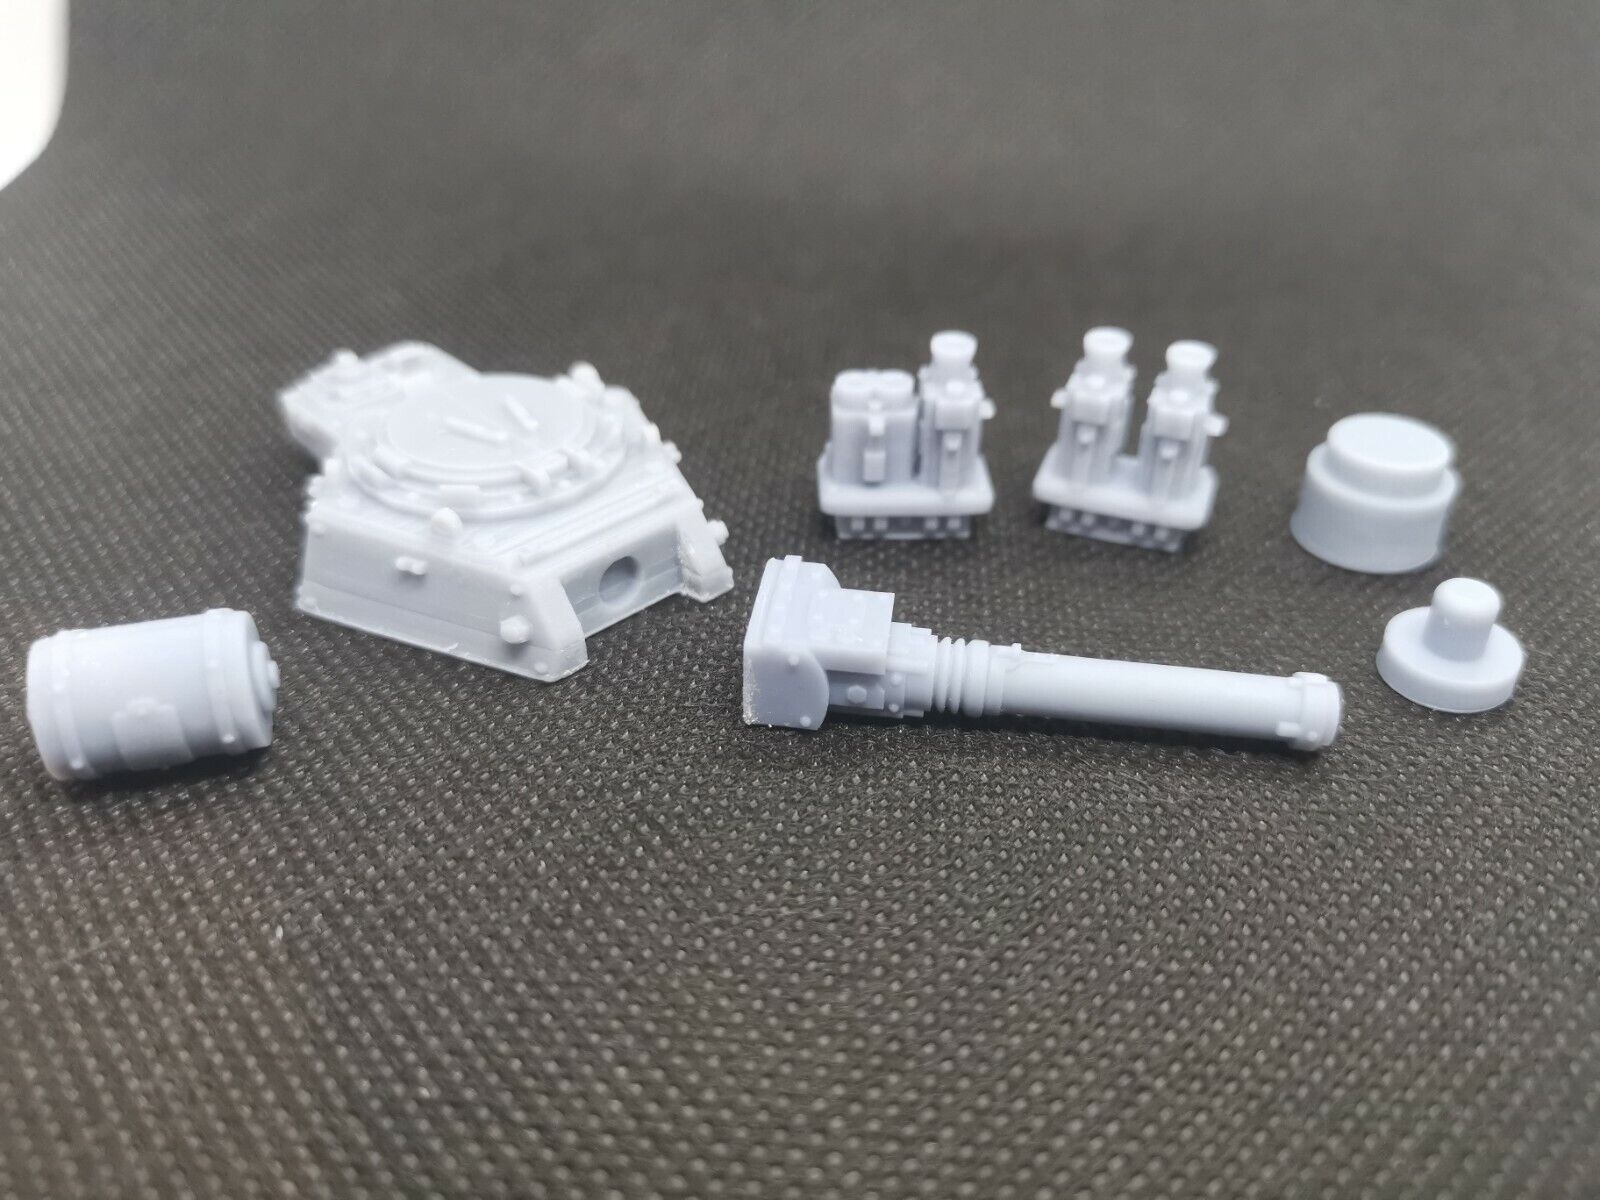 Chimera Turret & Weapons Bolters / Auto Cannon 28mm War Games